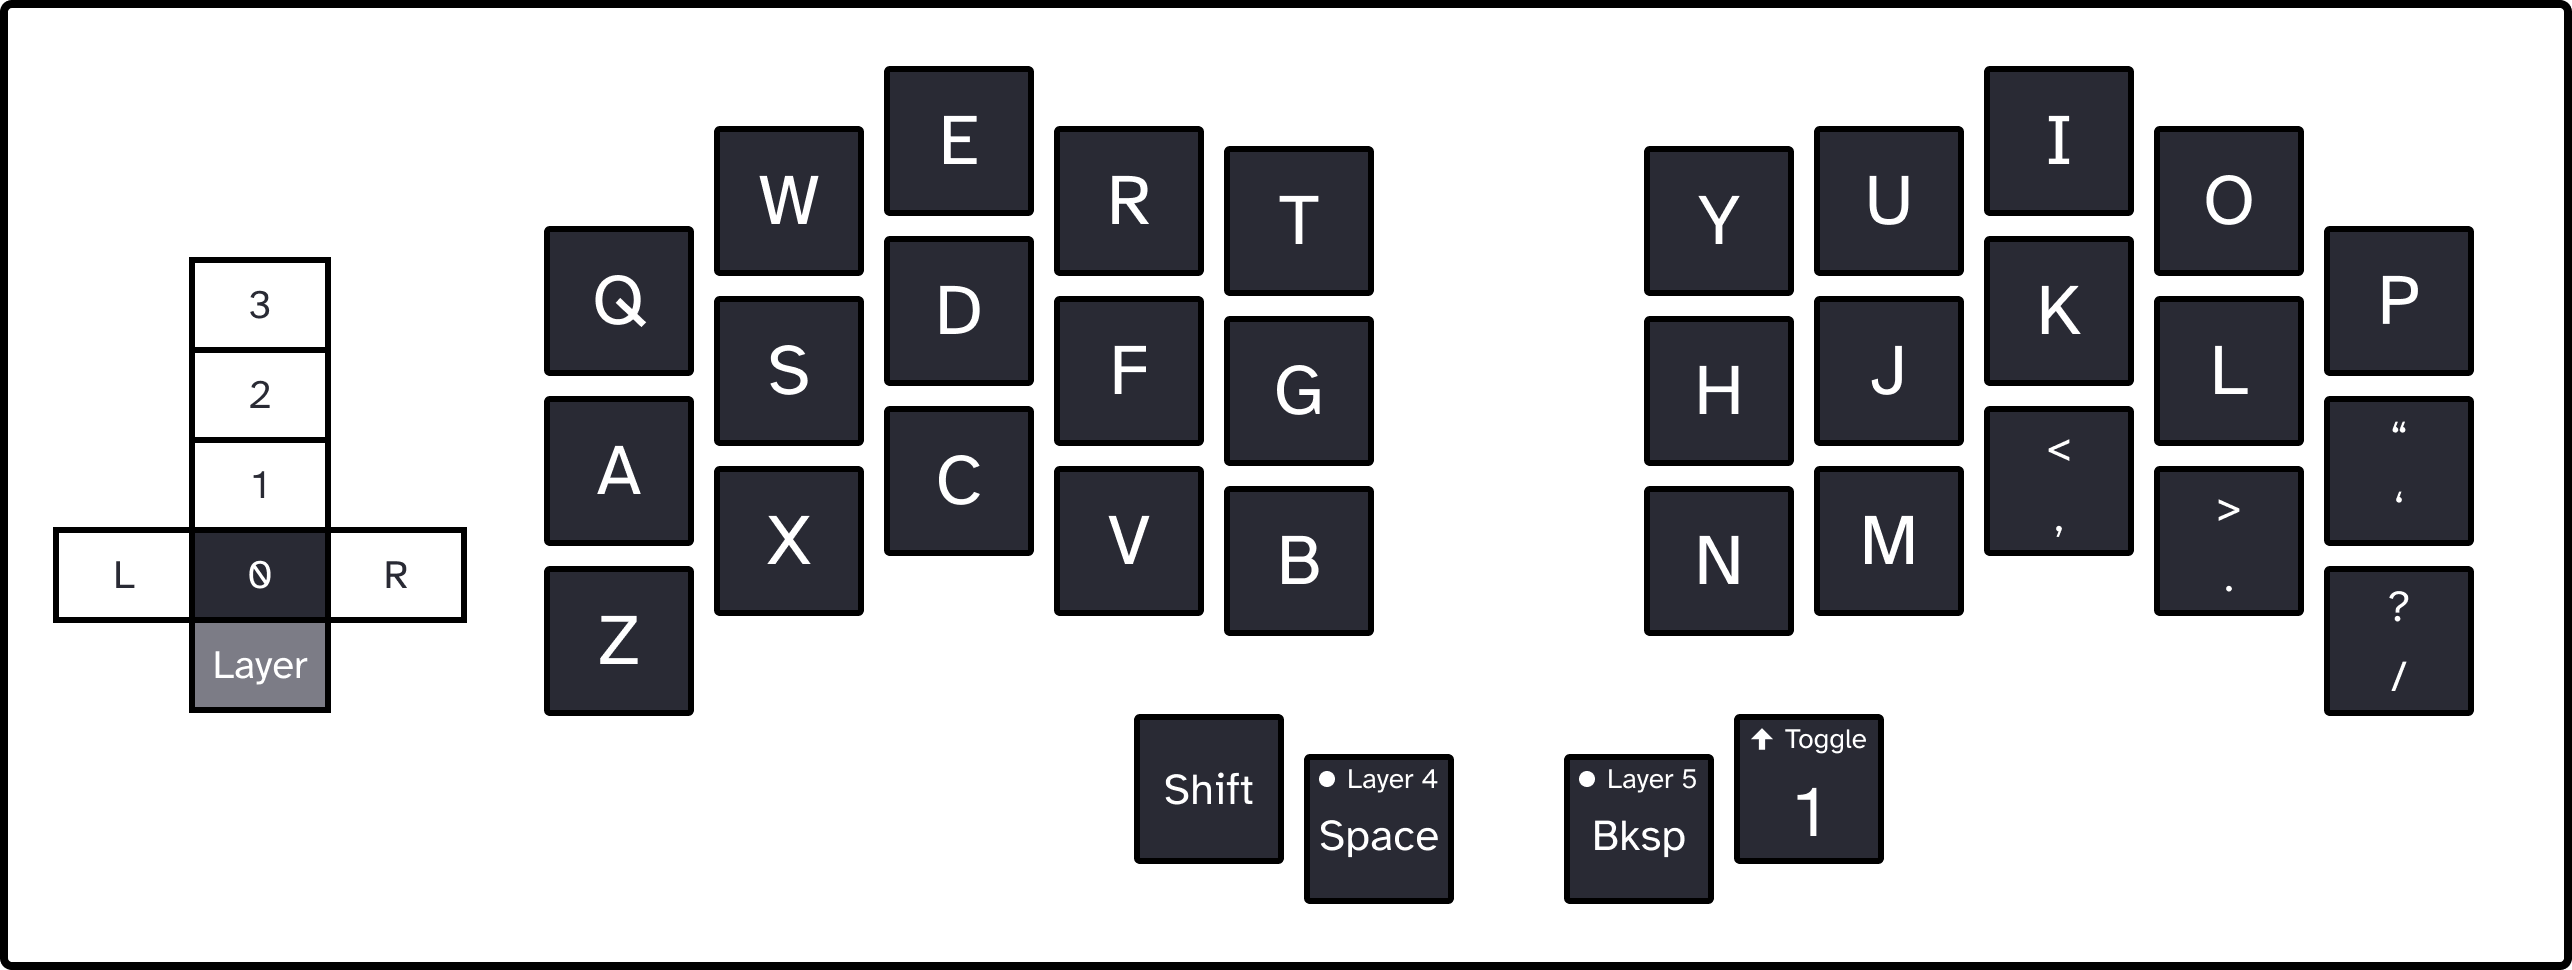 Layer 0 of my new keyboard layout for the Ferris Sweep. Keys from left to right, going down each finger from top to bottom. Left pinky: Q, A, Z. Left ring: W, S, X. Left middle: E, D, C. Left index first column: R, F, V. Left index second column: T, G, B. Left thumb 1: Space on tap, Layer 4 on hold. Left thumb 2: Shift. Right thumb 1: Backspace on tap, Layer 5 on hold. Right thumb 2: toggle Layer 1. Right index 2: Y, H, N. Right index 1: U, J, M. Right middle: I, K, Comma. Right ring: O, L, period. Right pinky: P, apostrophe, forward slash.